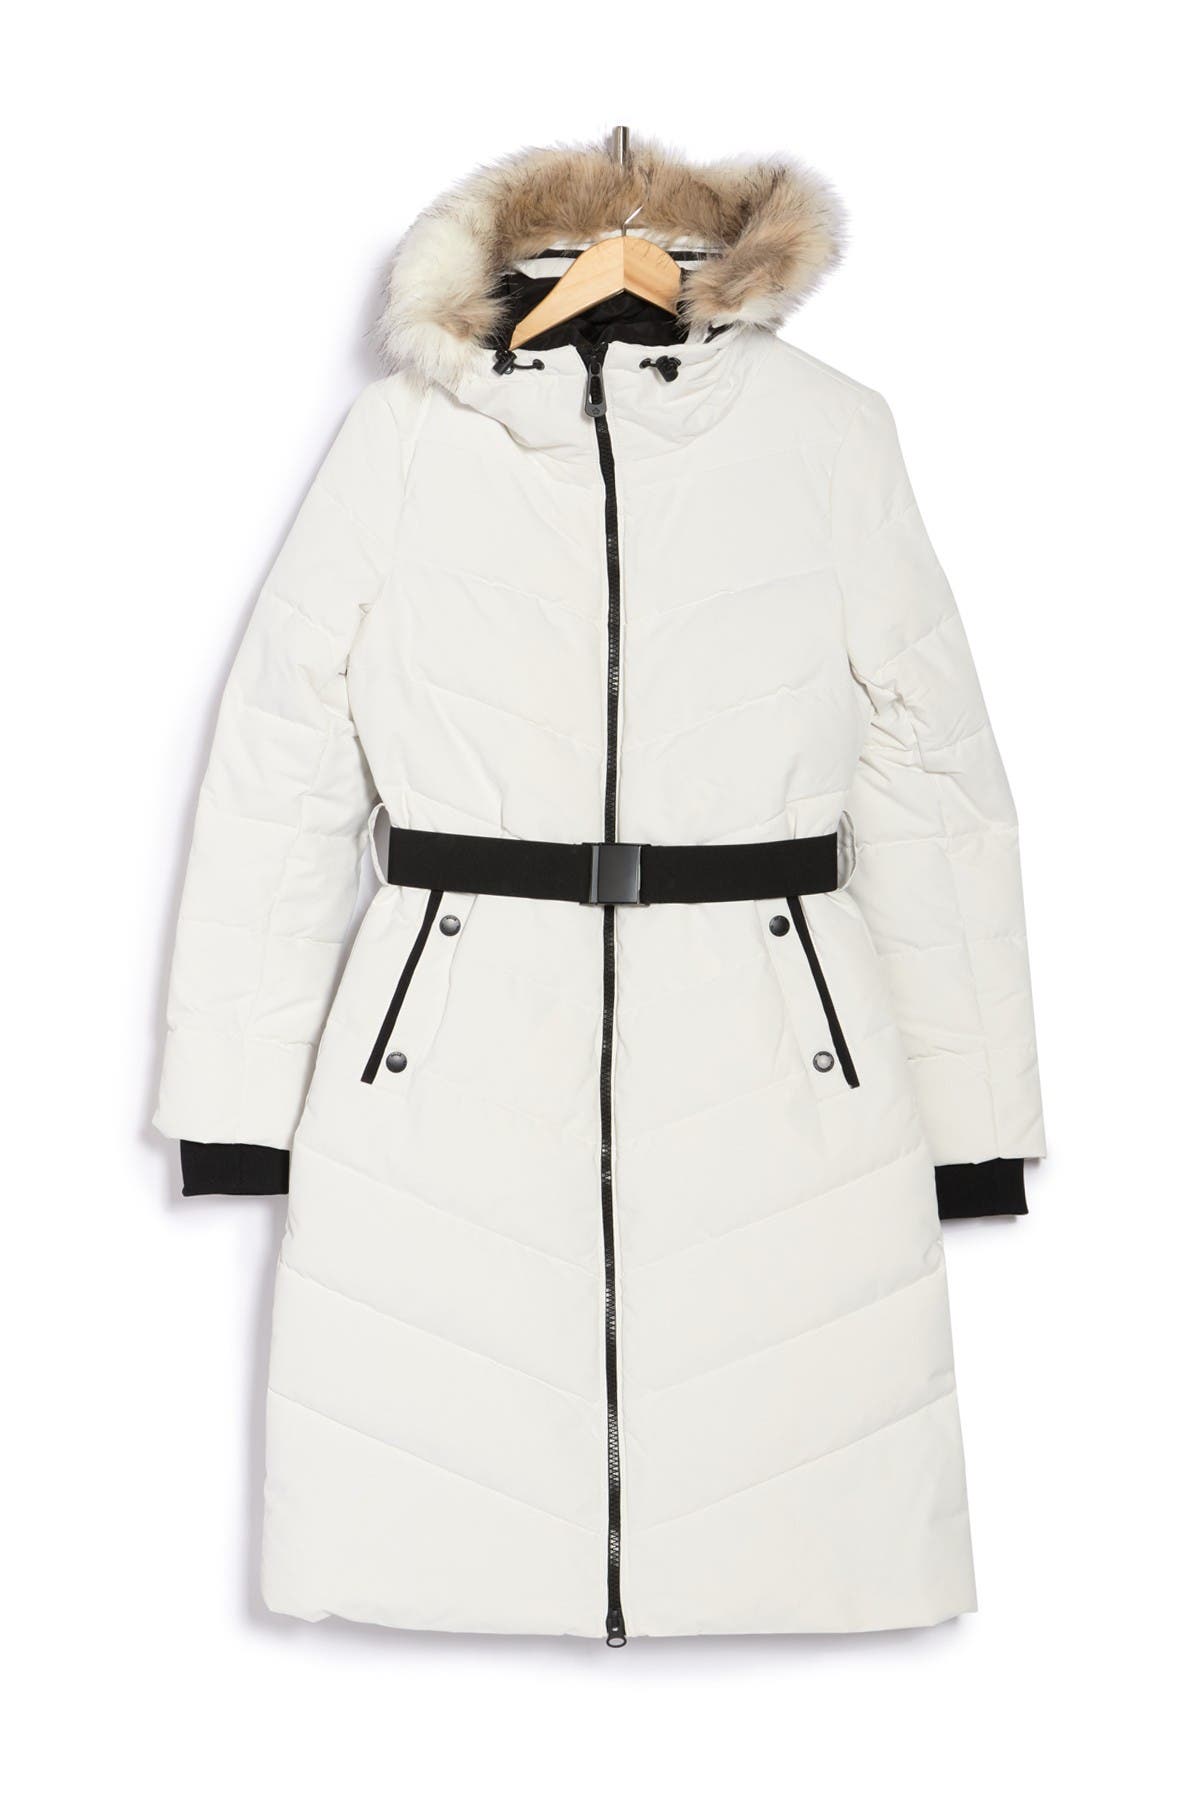 NOIZE | Capri Faux Fur Hooded Quilted Parka | Nordstrom Rack